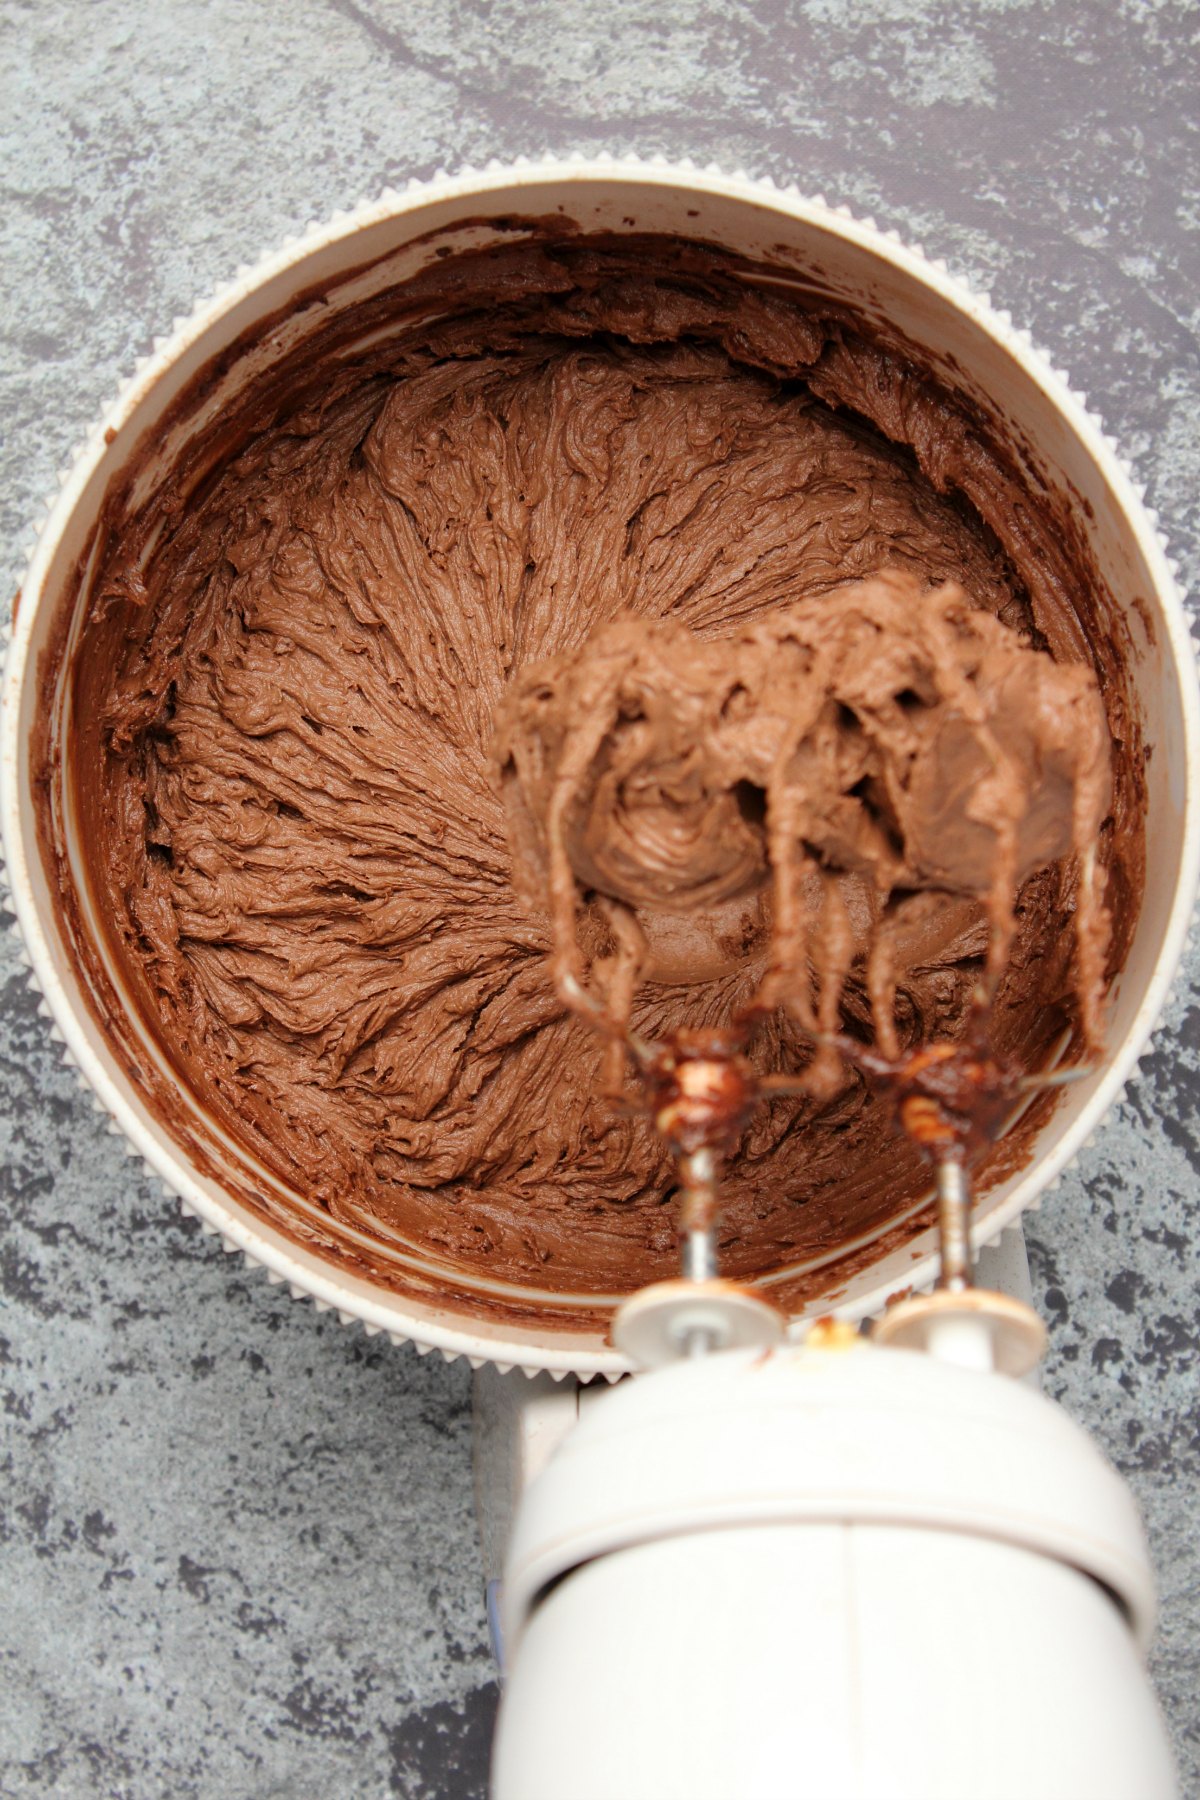 Vegan chocolate buttercream frosting in a stand mixer.